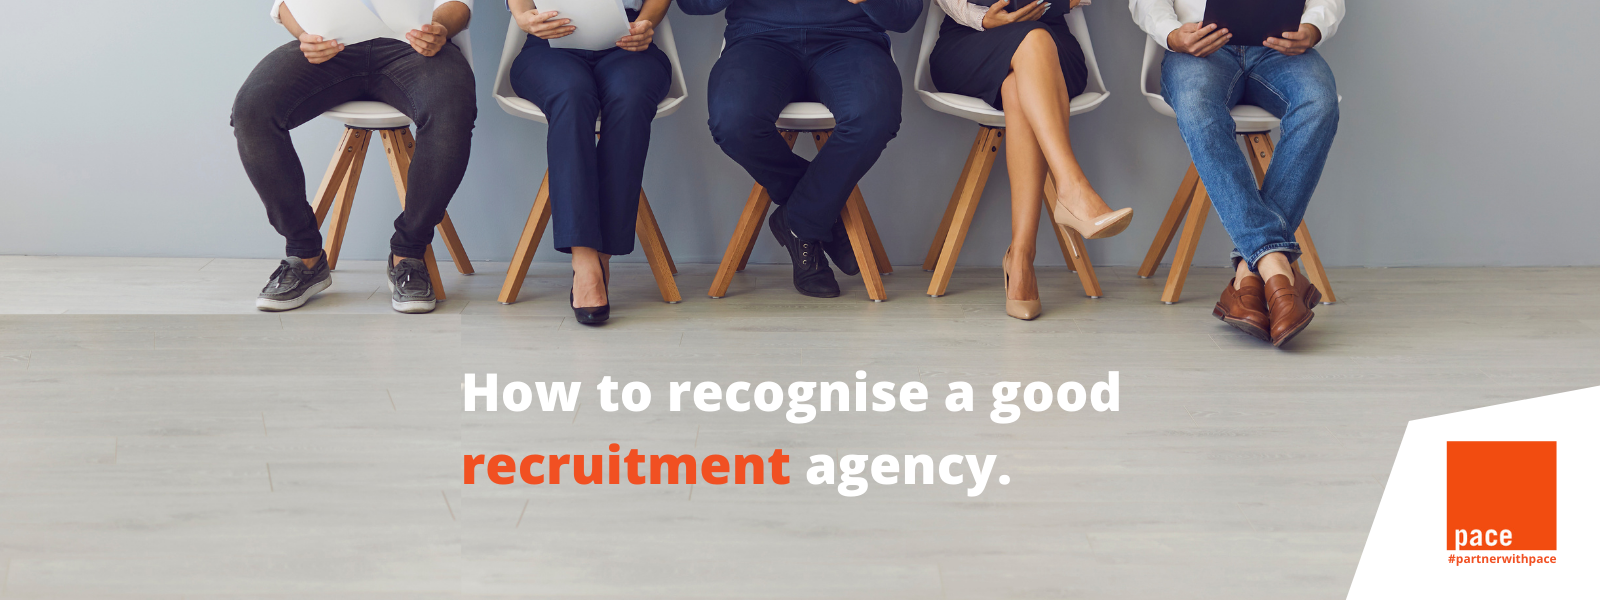 How to recognise a great recruitment agency News Banner Image